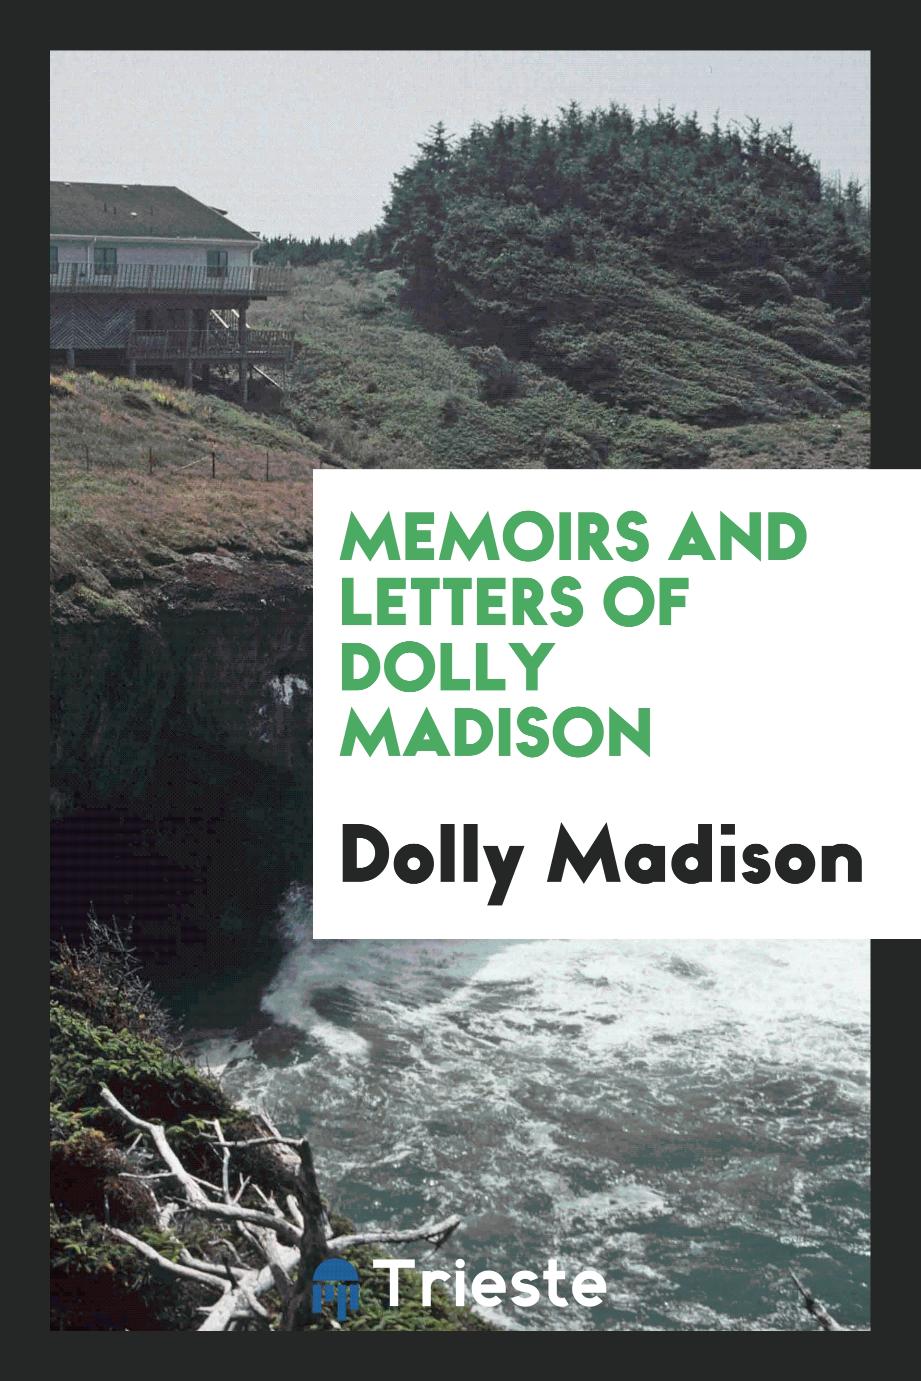 Memoirs and letters of Dolly Madison